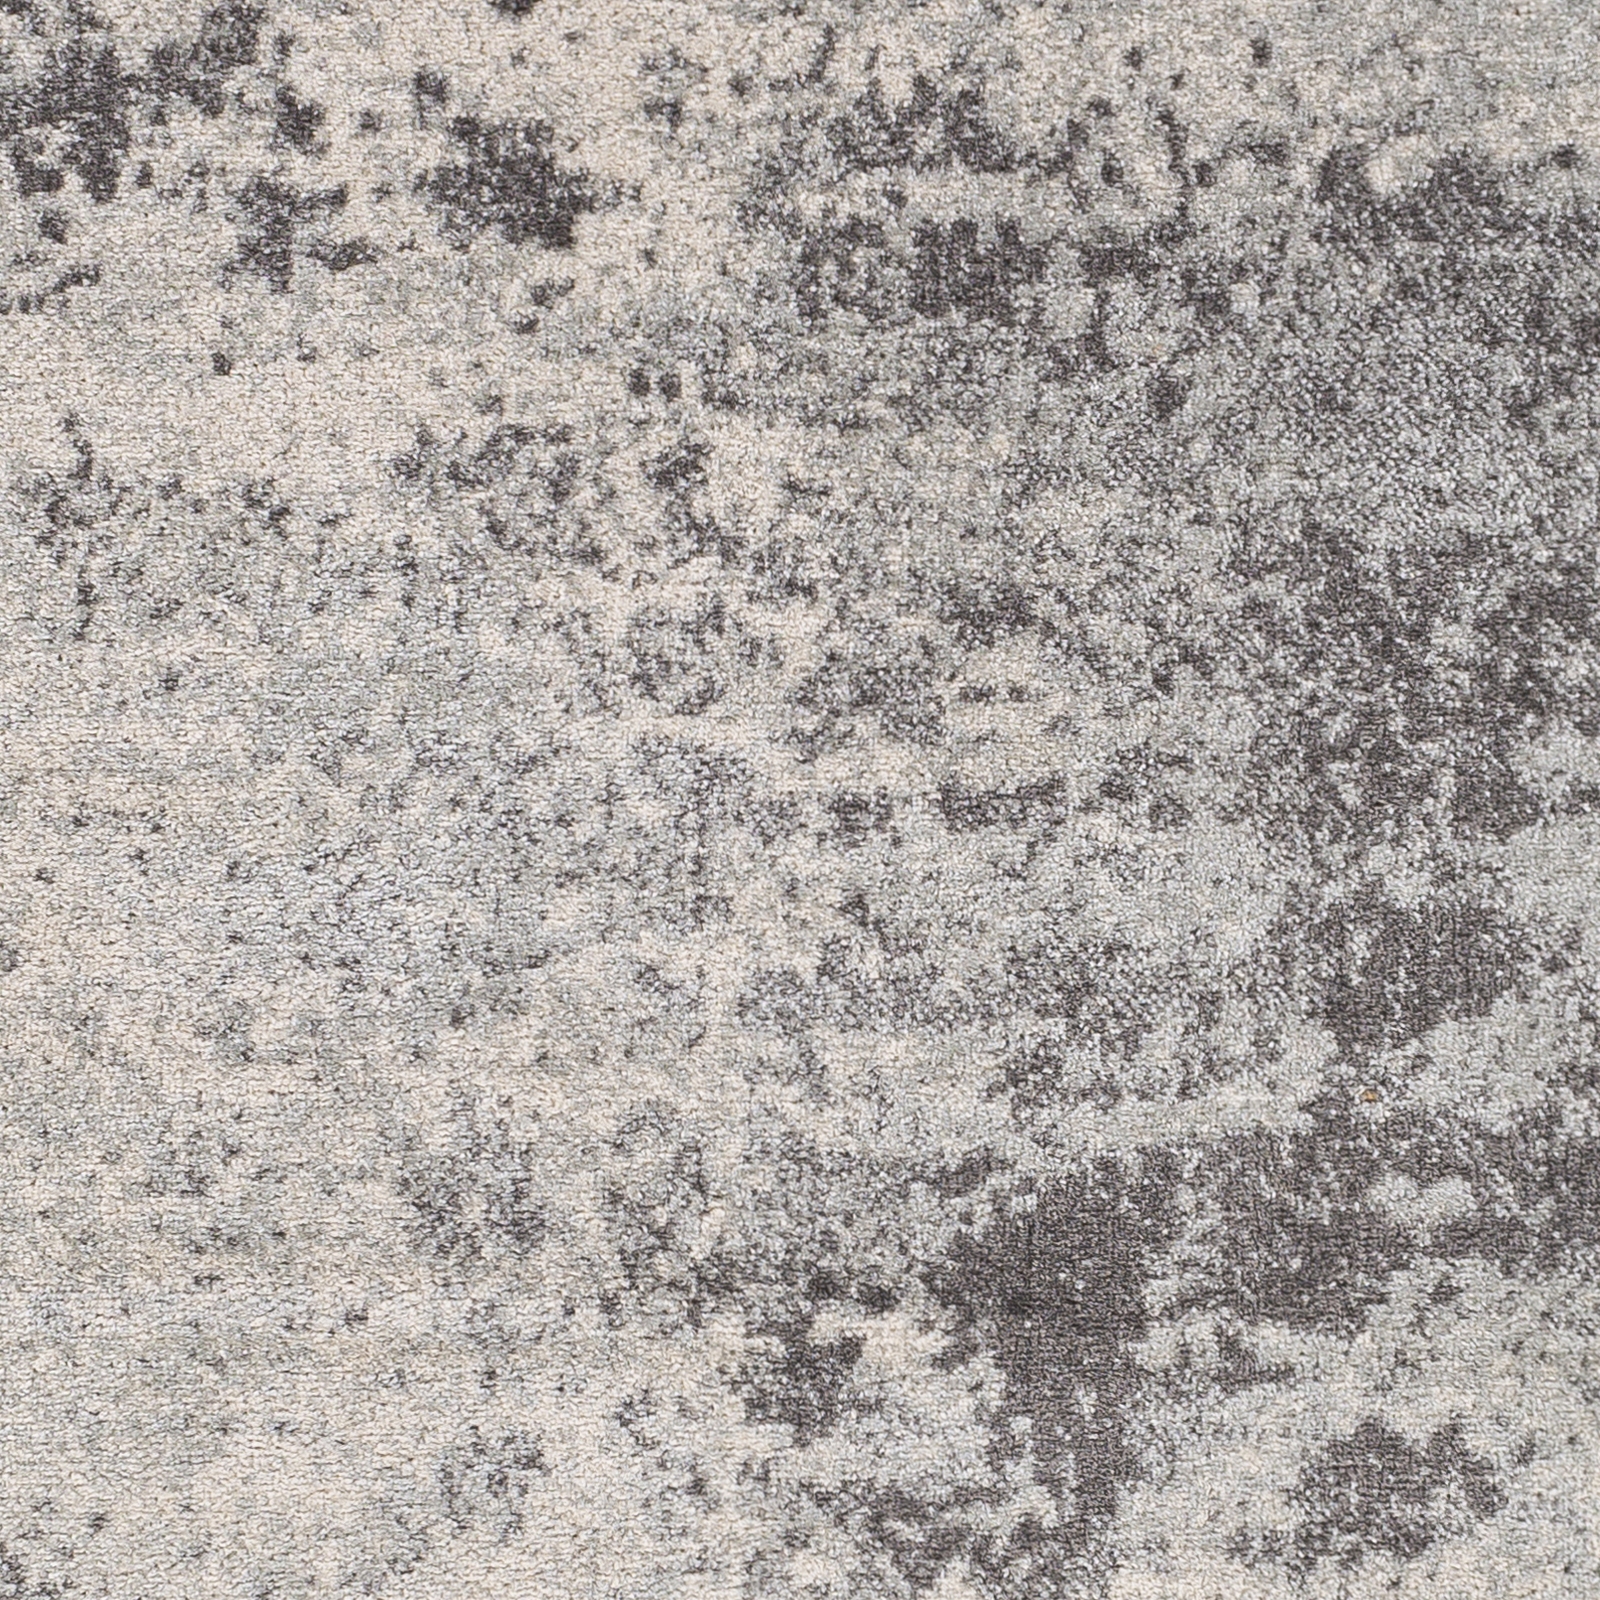 Chester Rug, 6'7" x 9' - Image 5